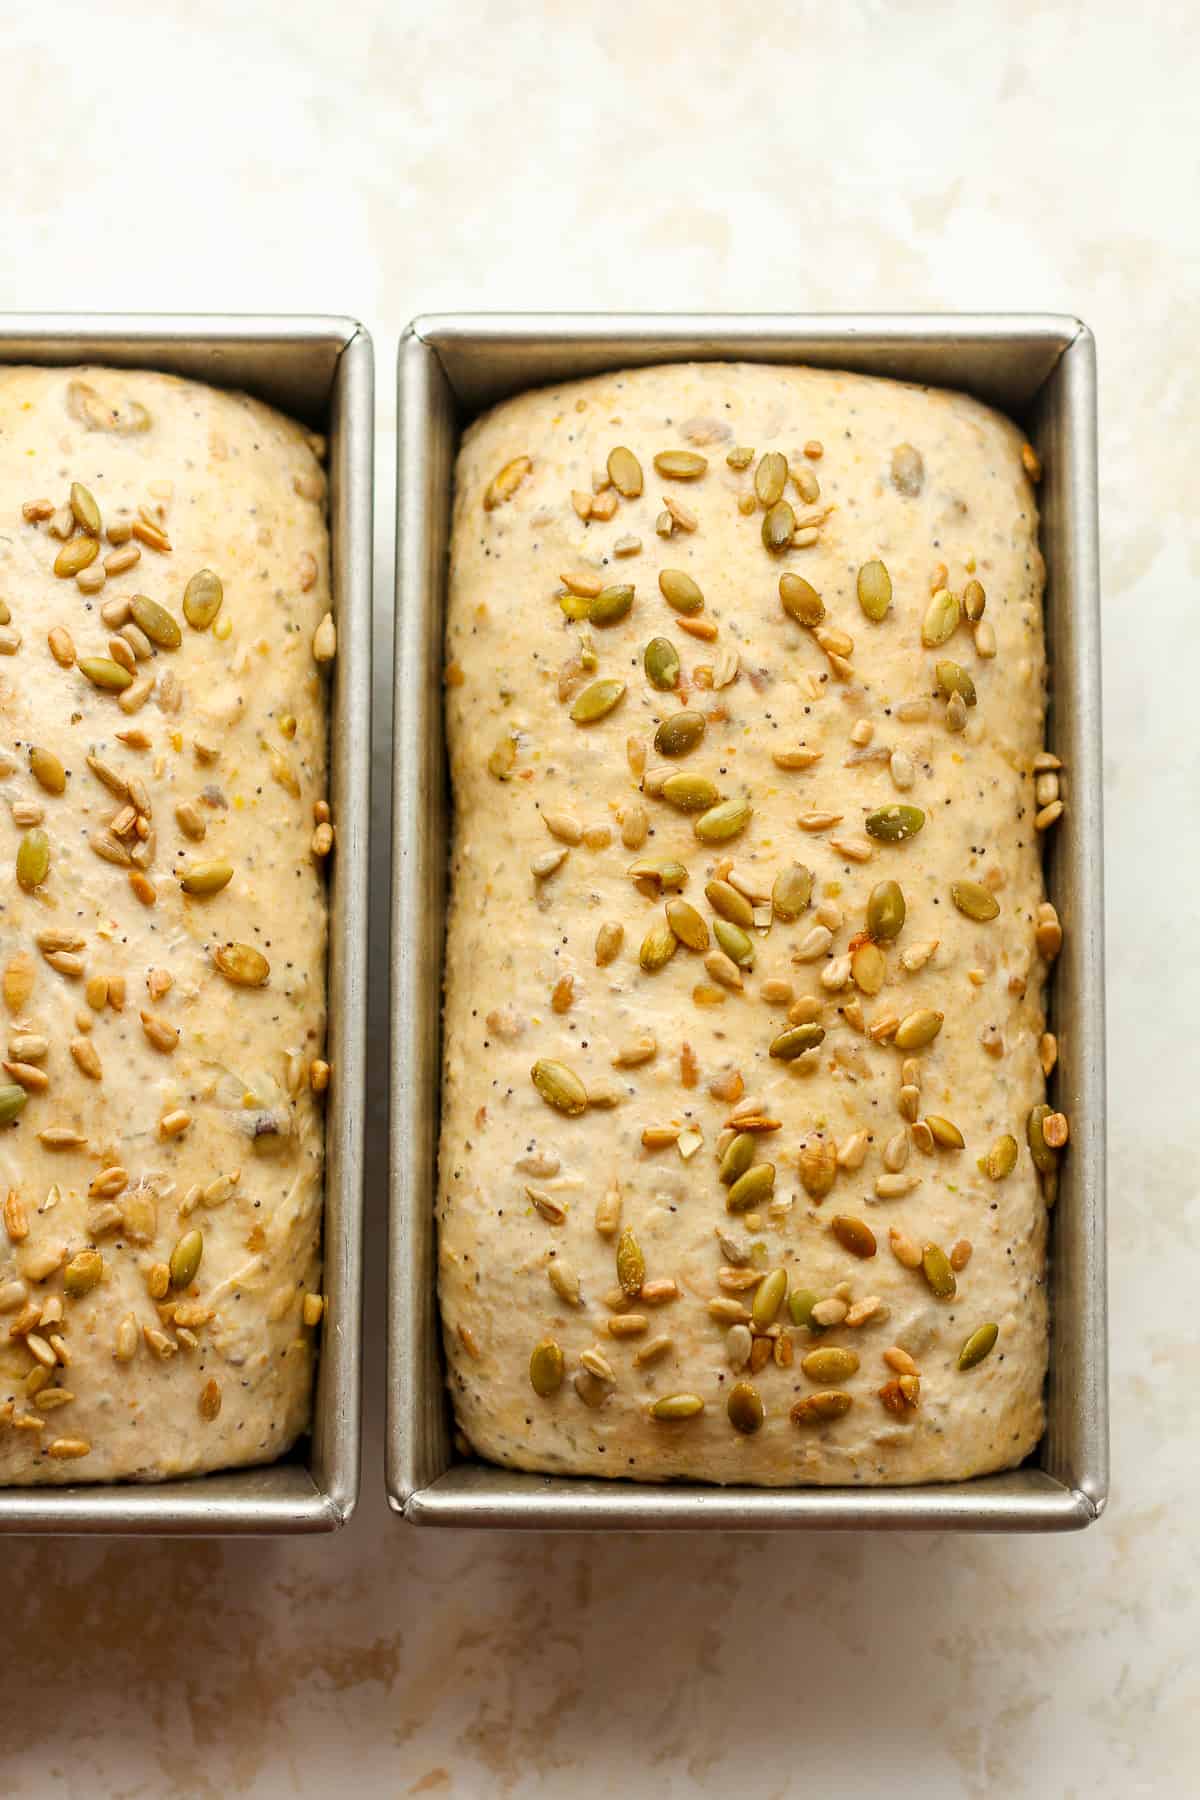 Two pans of multigrain bread dough with nuts on top,